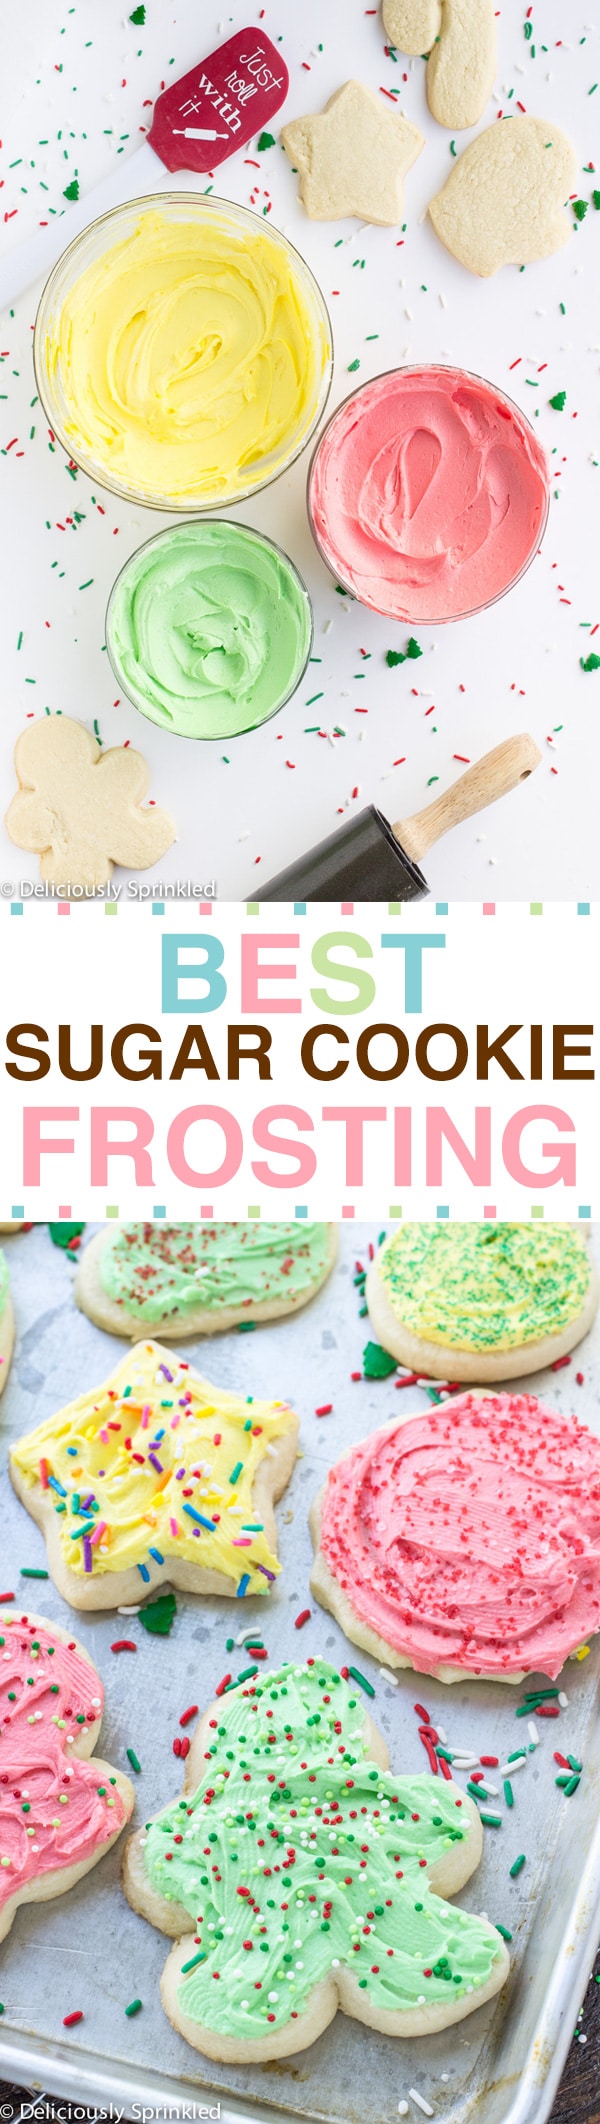 THE BEST SUGAR COOKIE FROSTING RECIPE